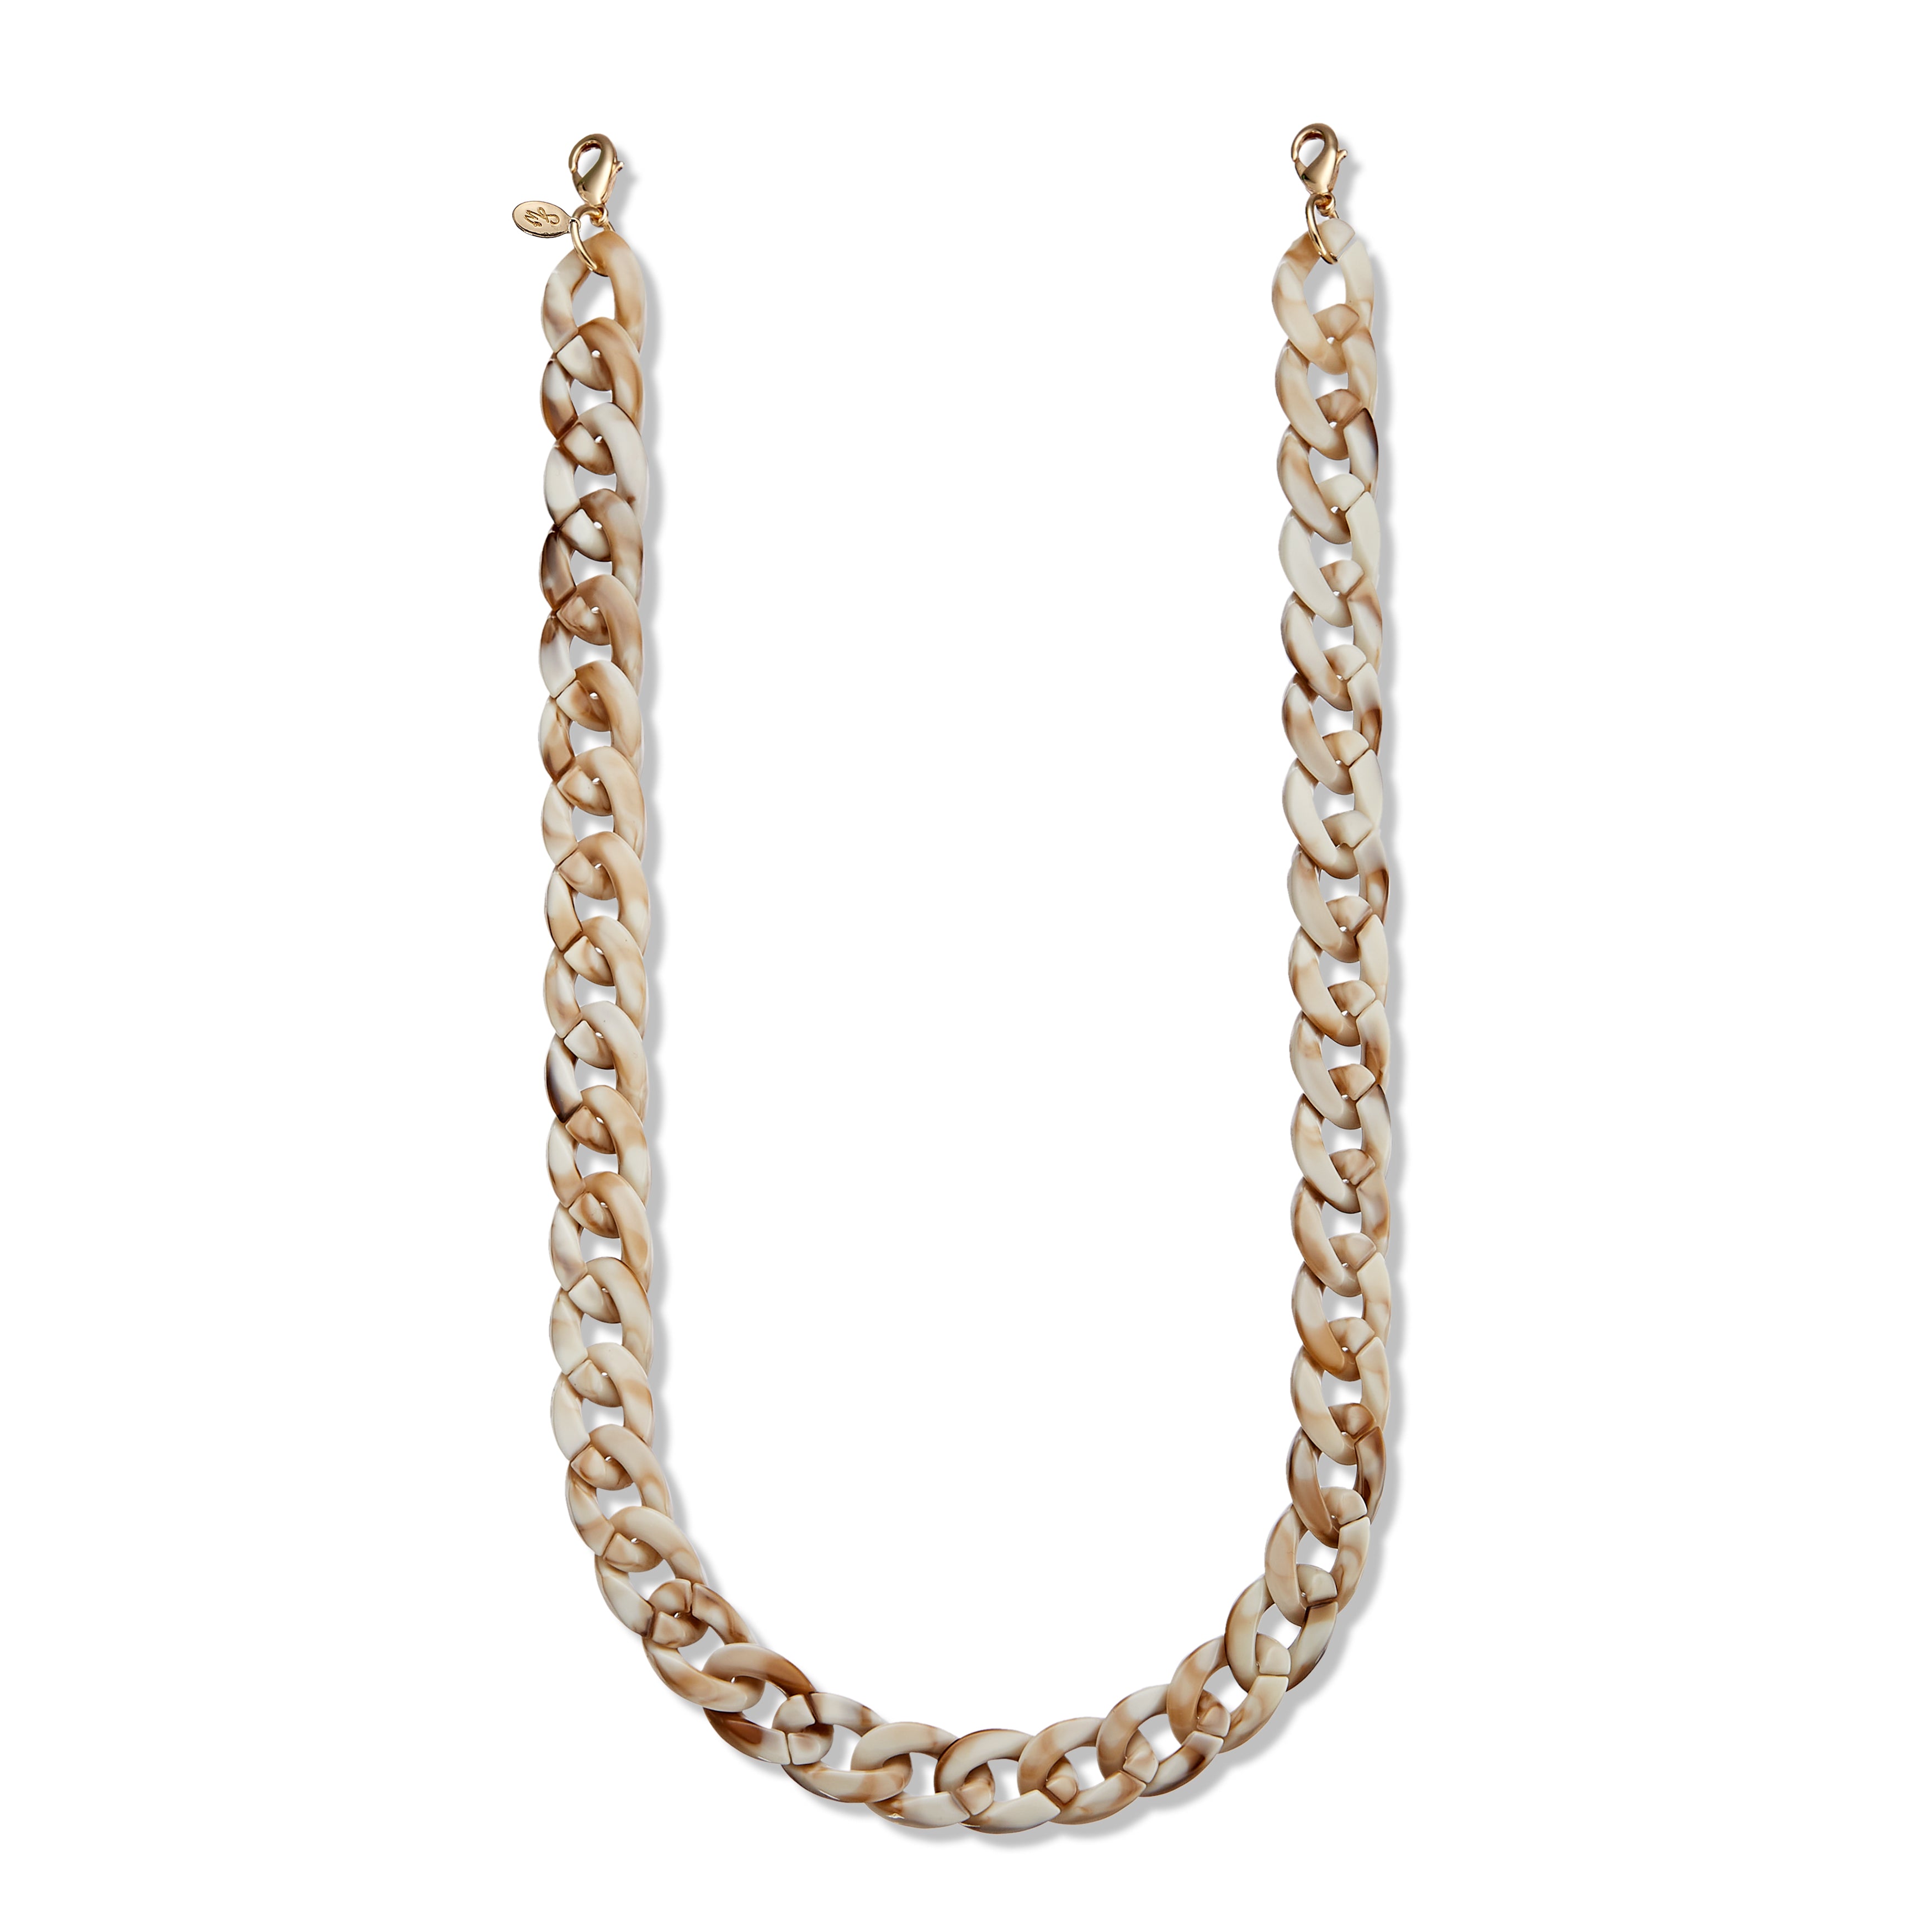 Detachable 16mm Chunky Chain in Tan Marble.